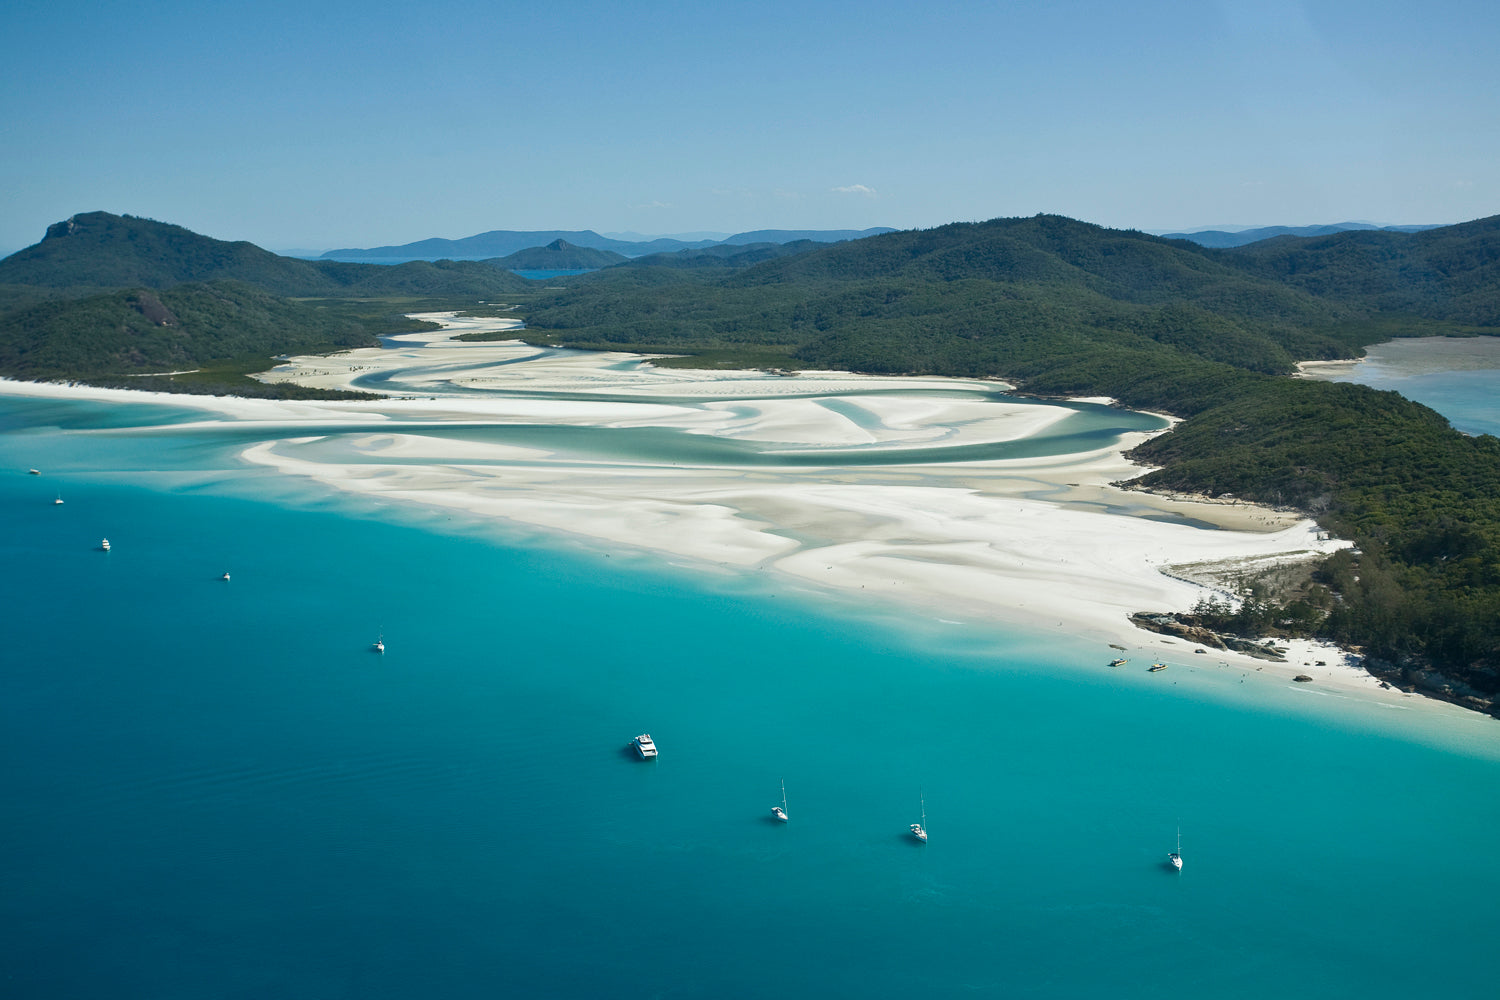 neat row of anchored vessels along a white sandy beach with a swirling turquiose water river running out the ocean